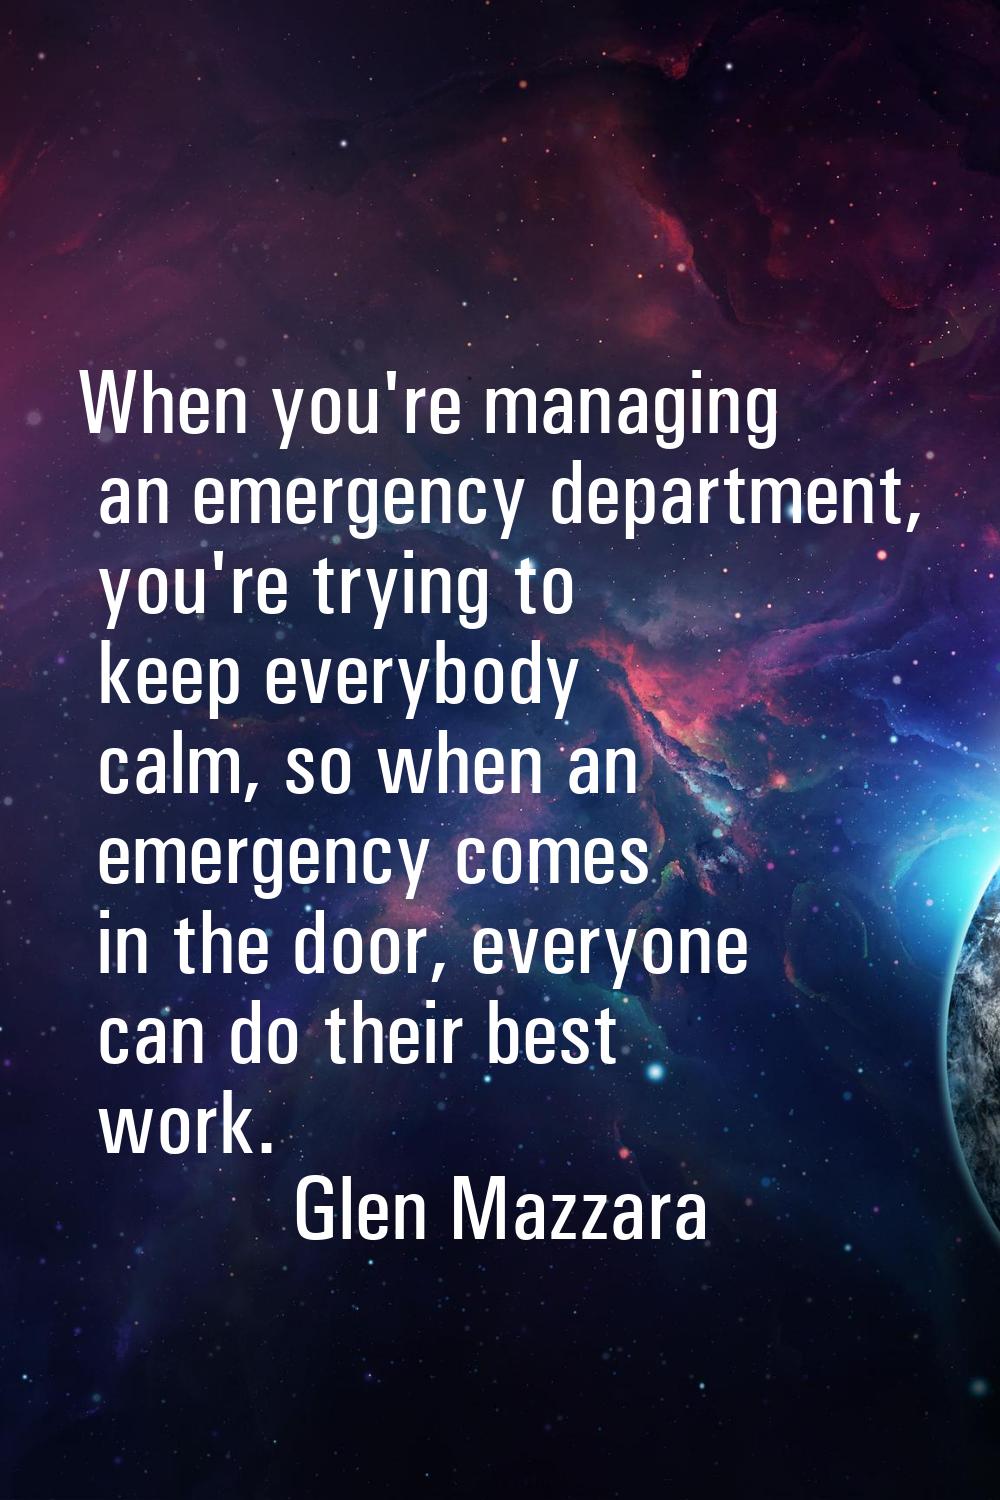 When you're managing an emergency department, you're trying to keep everybody calm, so when an emer